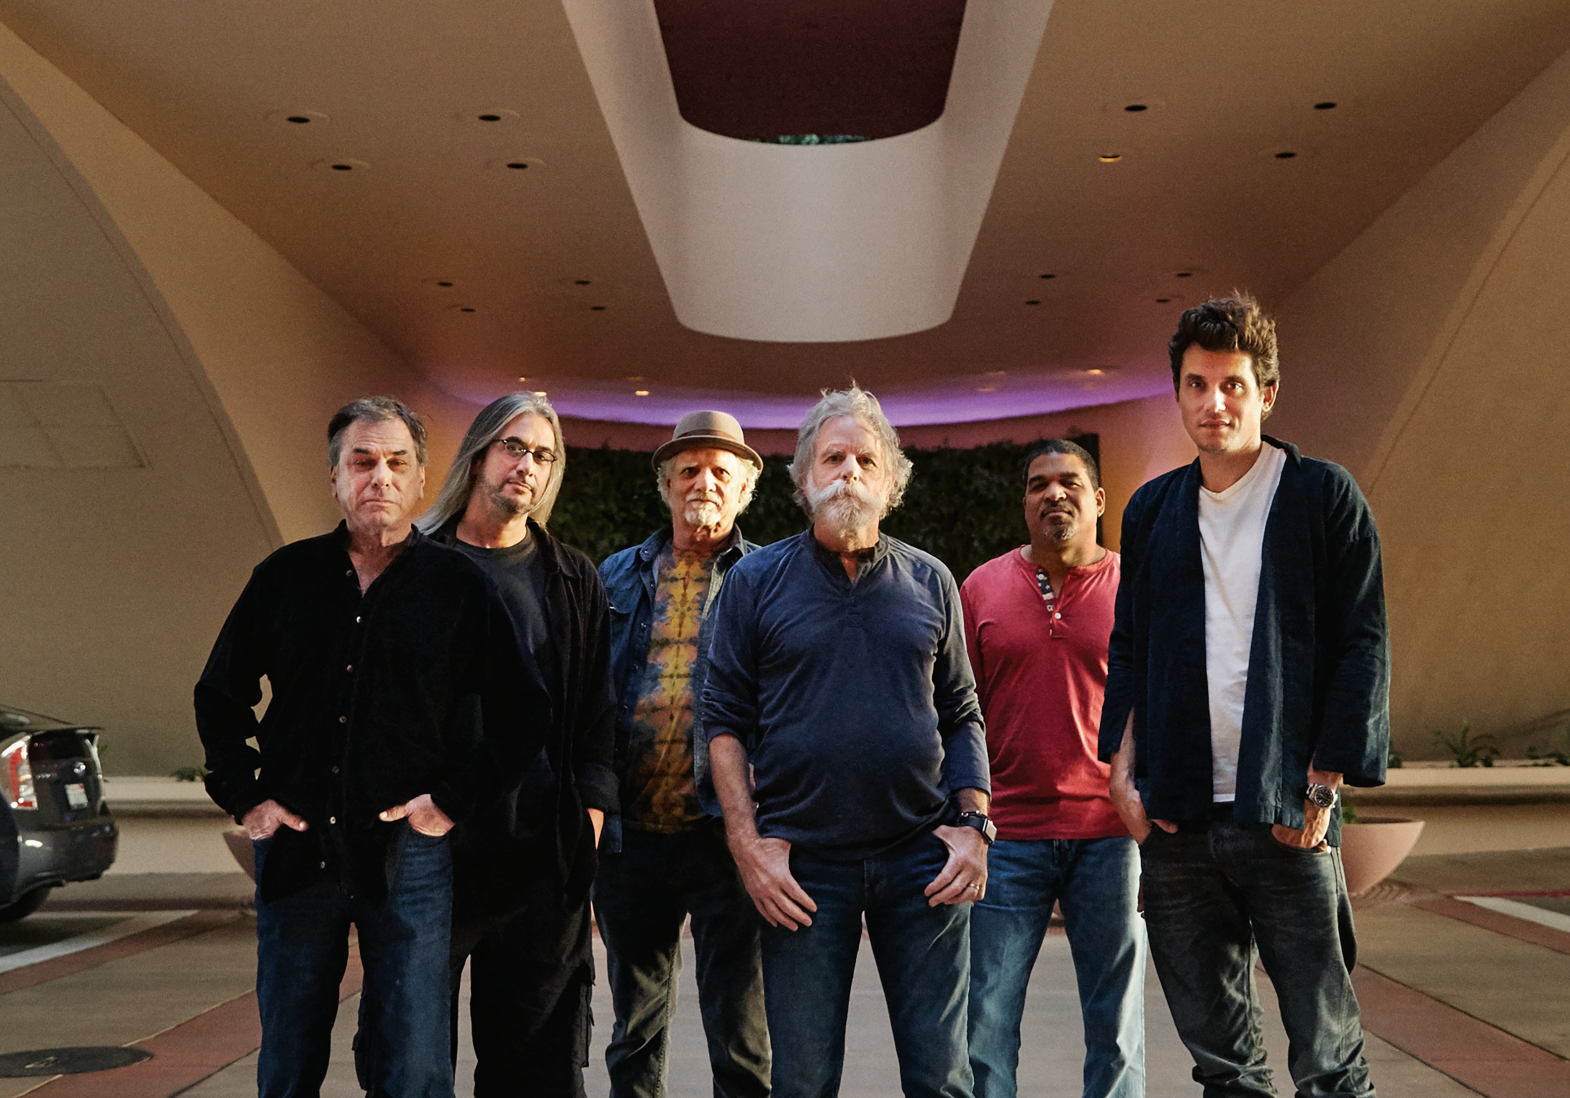 Dead & Company: The Music Never Stopped